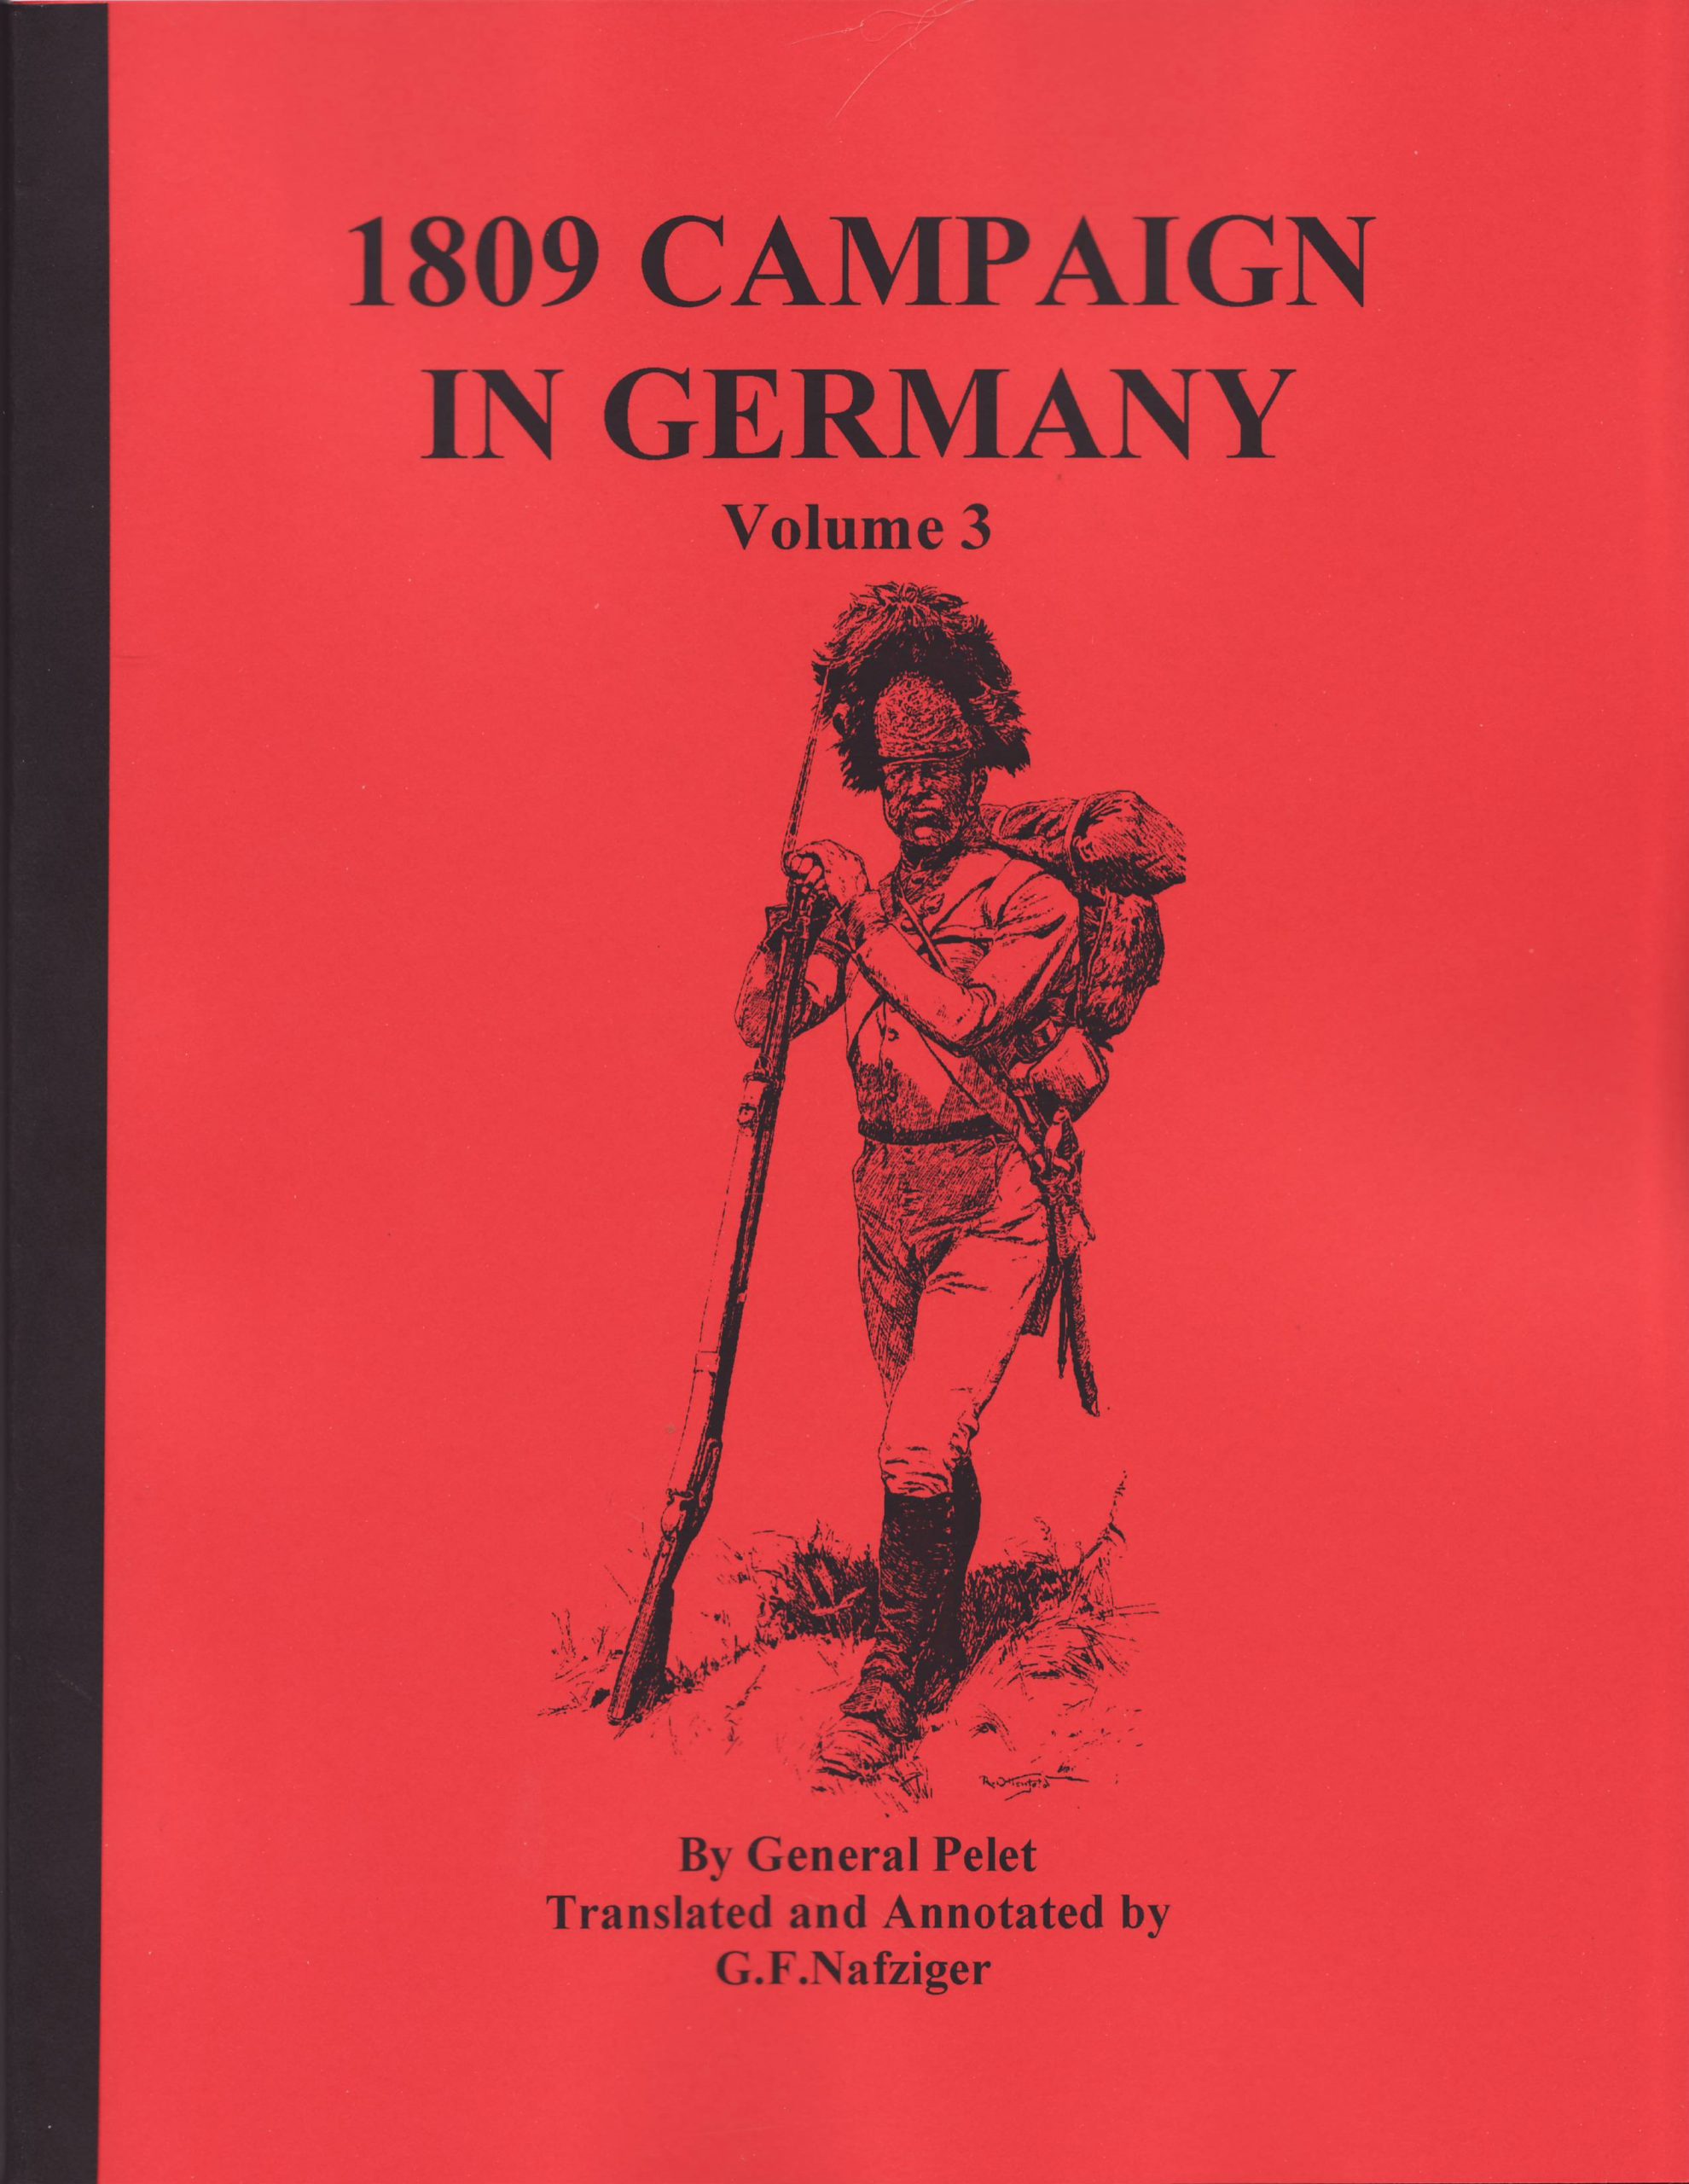 1809 Campaign in Germany Volume 3 - Nafziger Collection